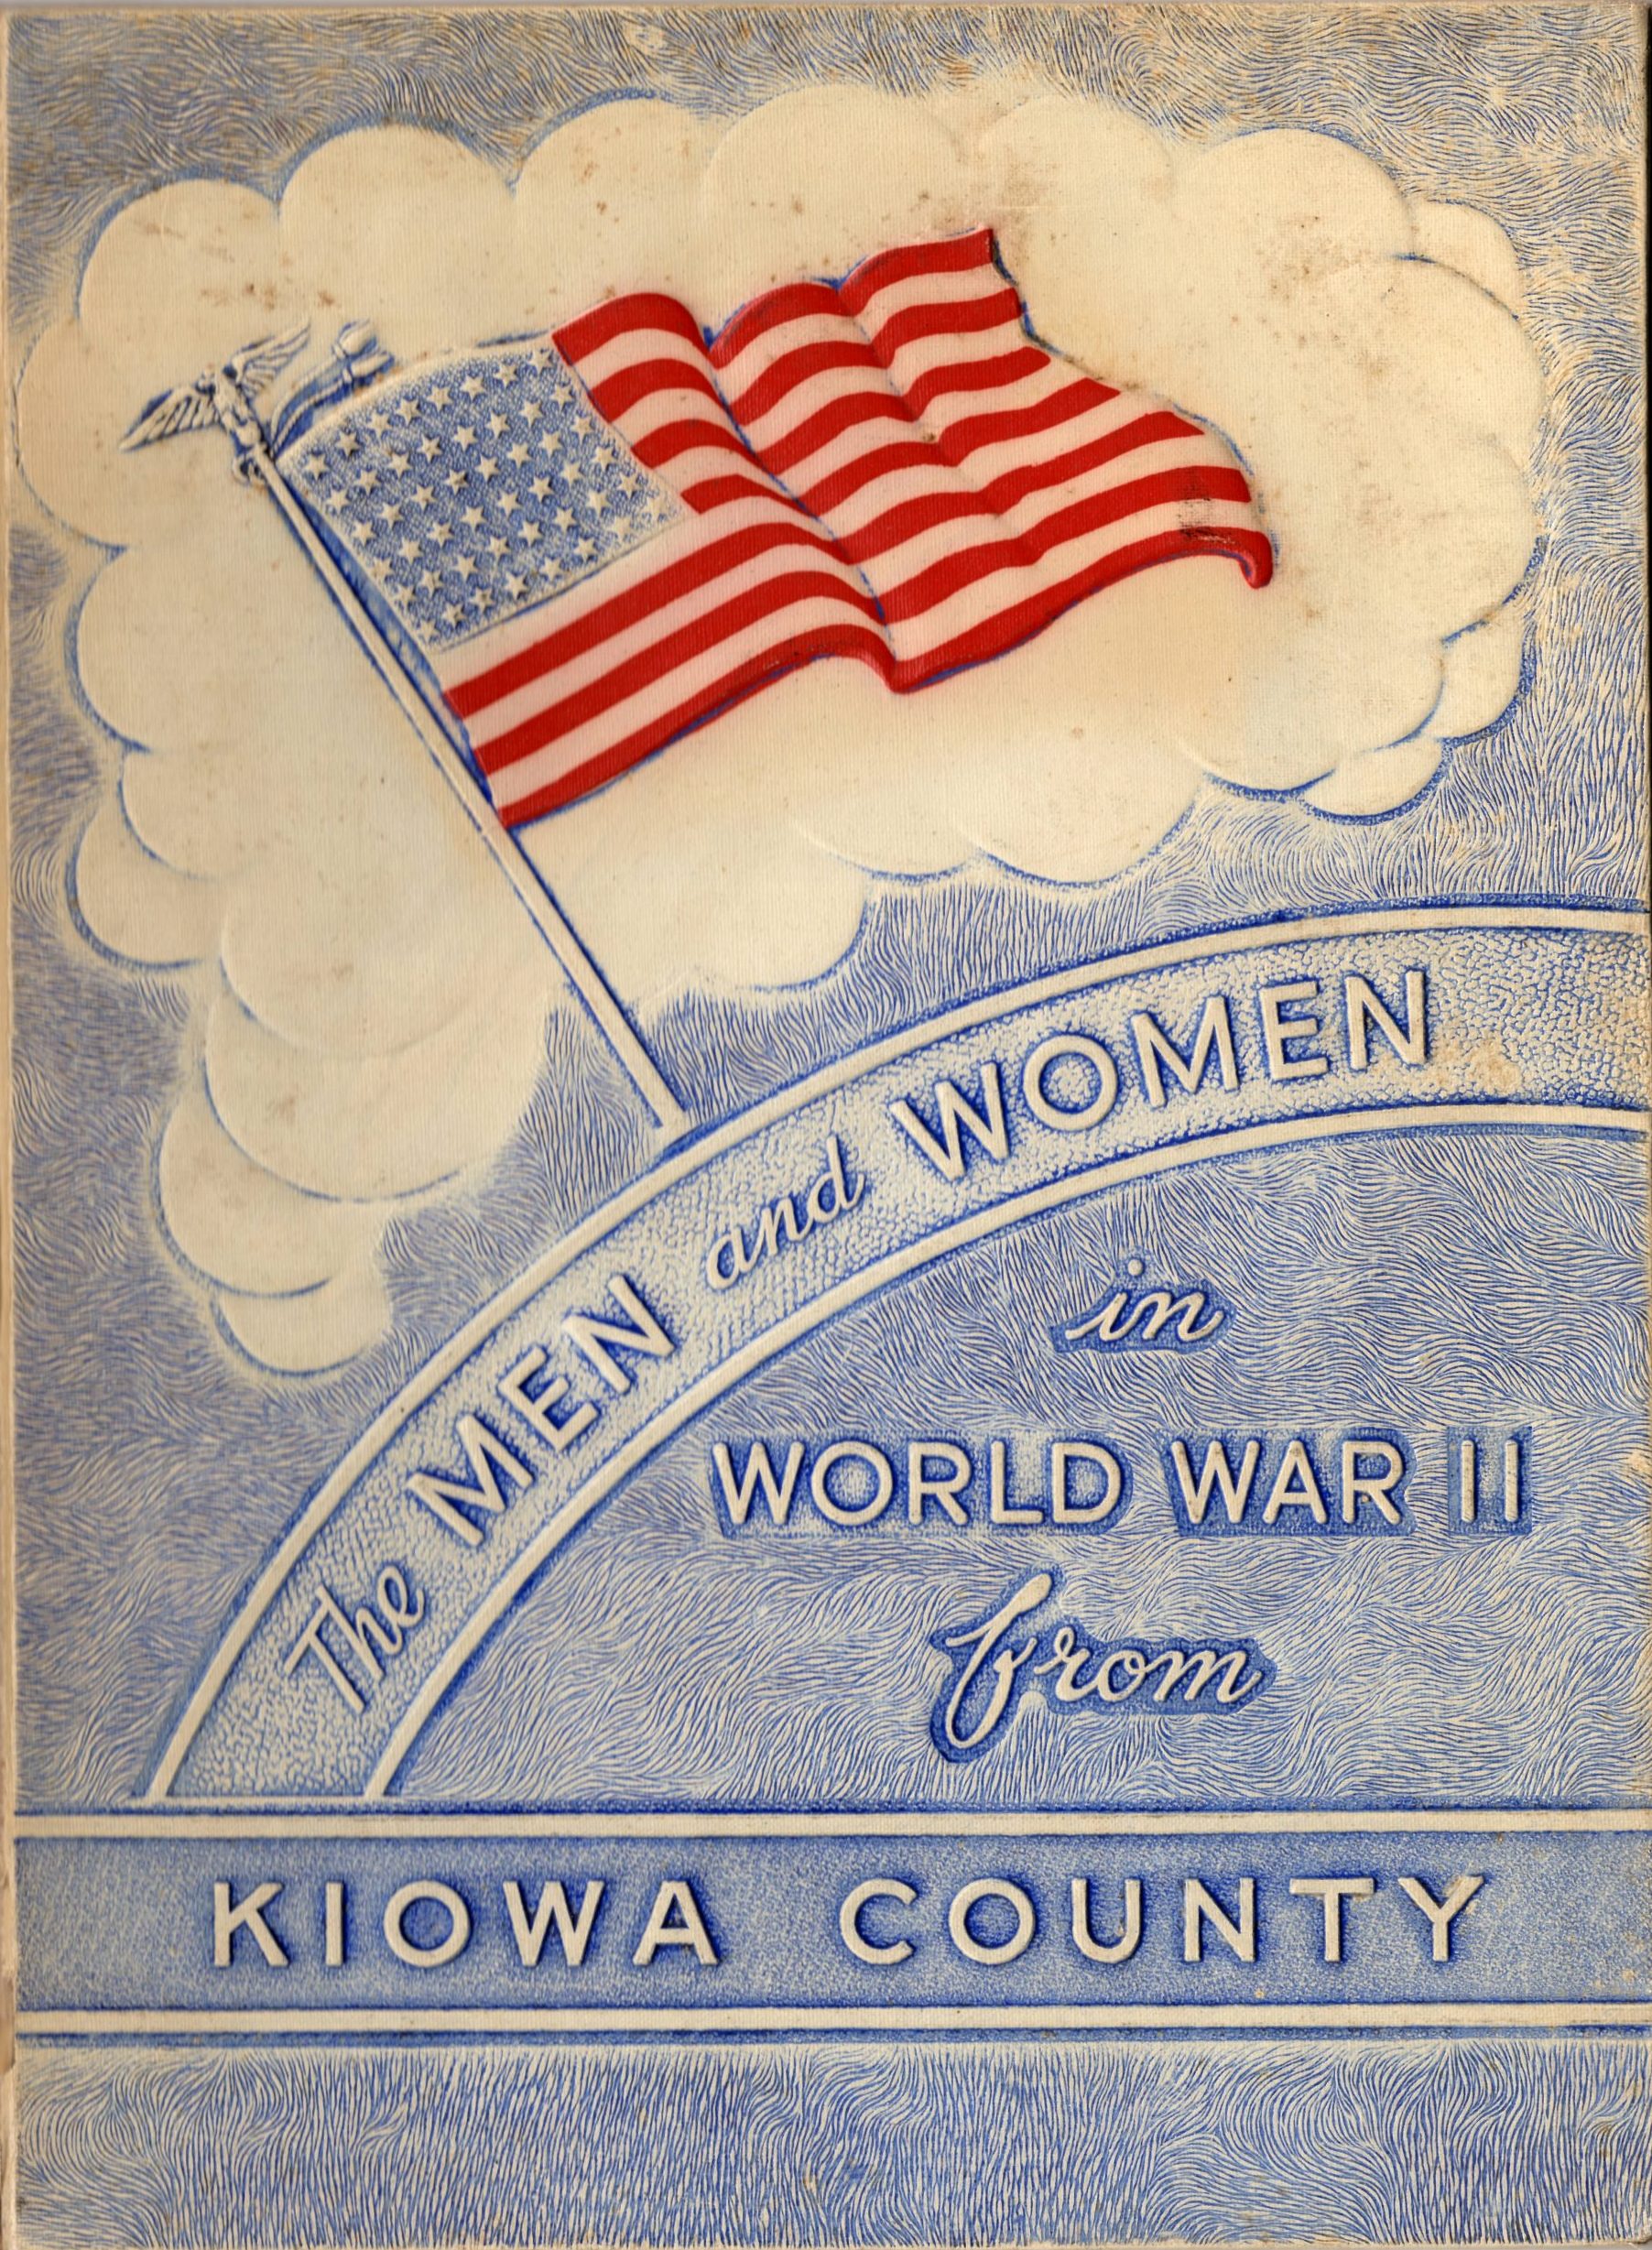 Men and Women in the Armed Forces from Kiowa County Oklahoma